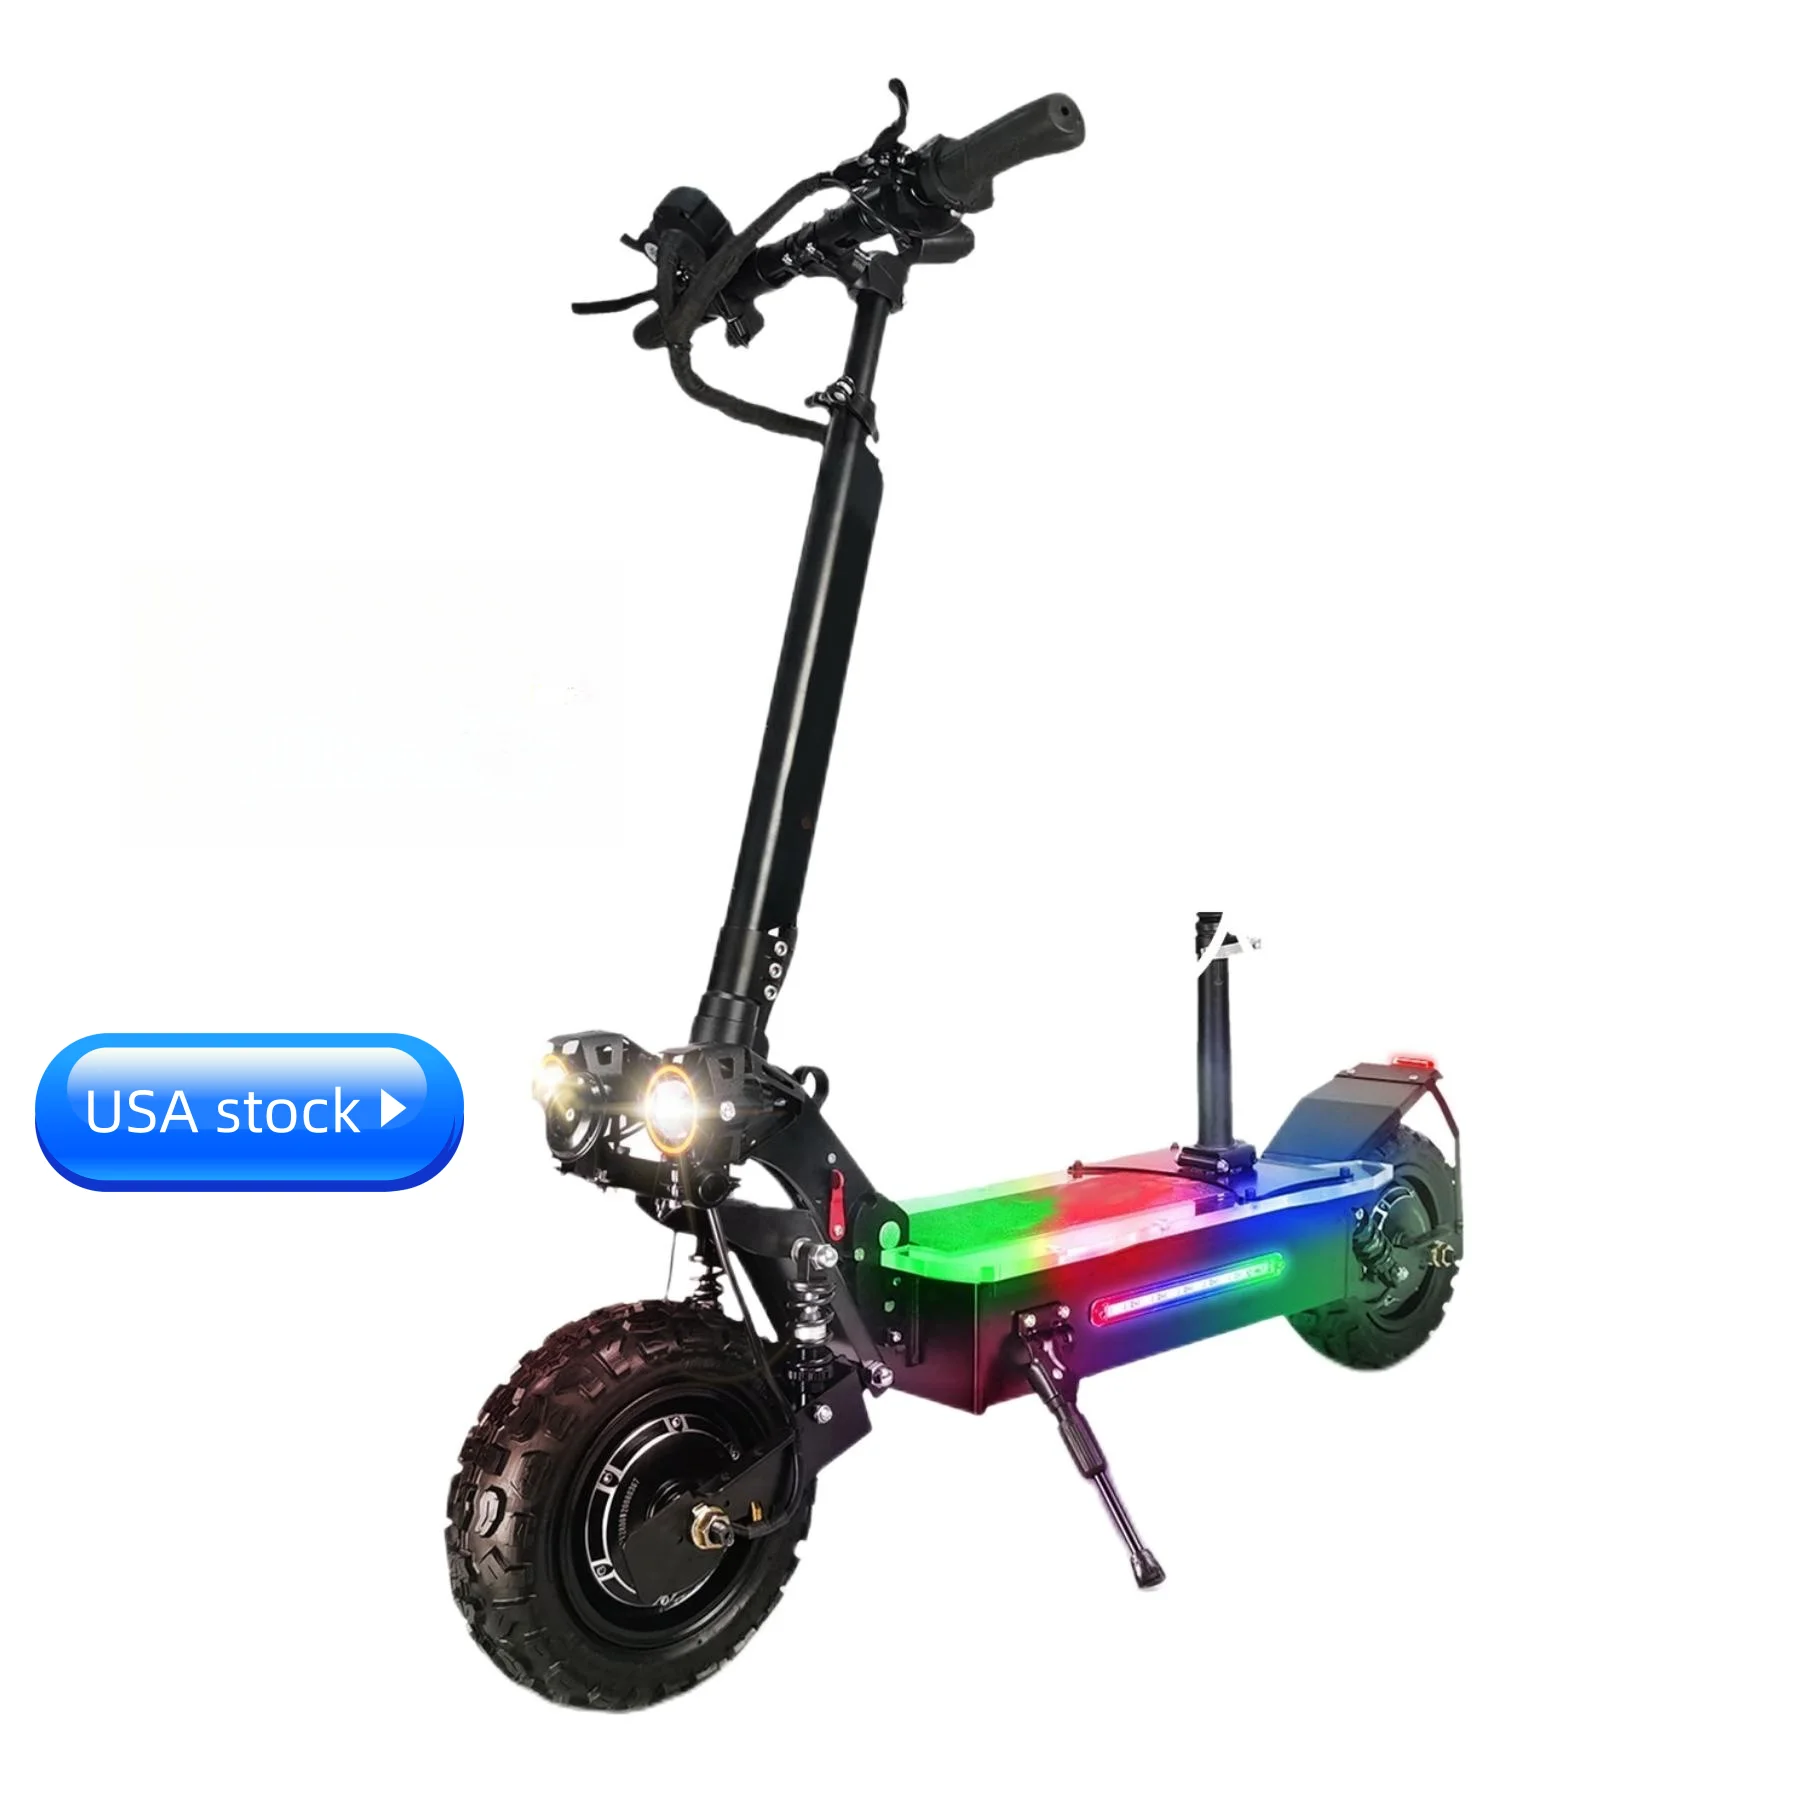 

Hot Sale 60v 5600w electric scooters 11inch off road tire dual motor e scooter max load 200kg e scooter in USA warehouse